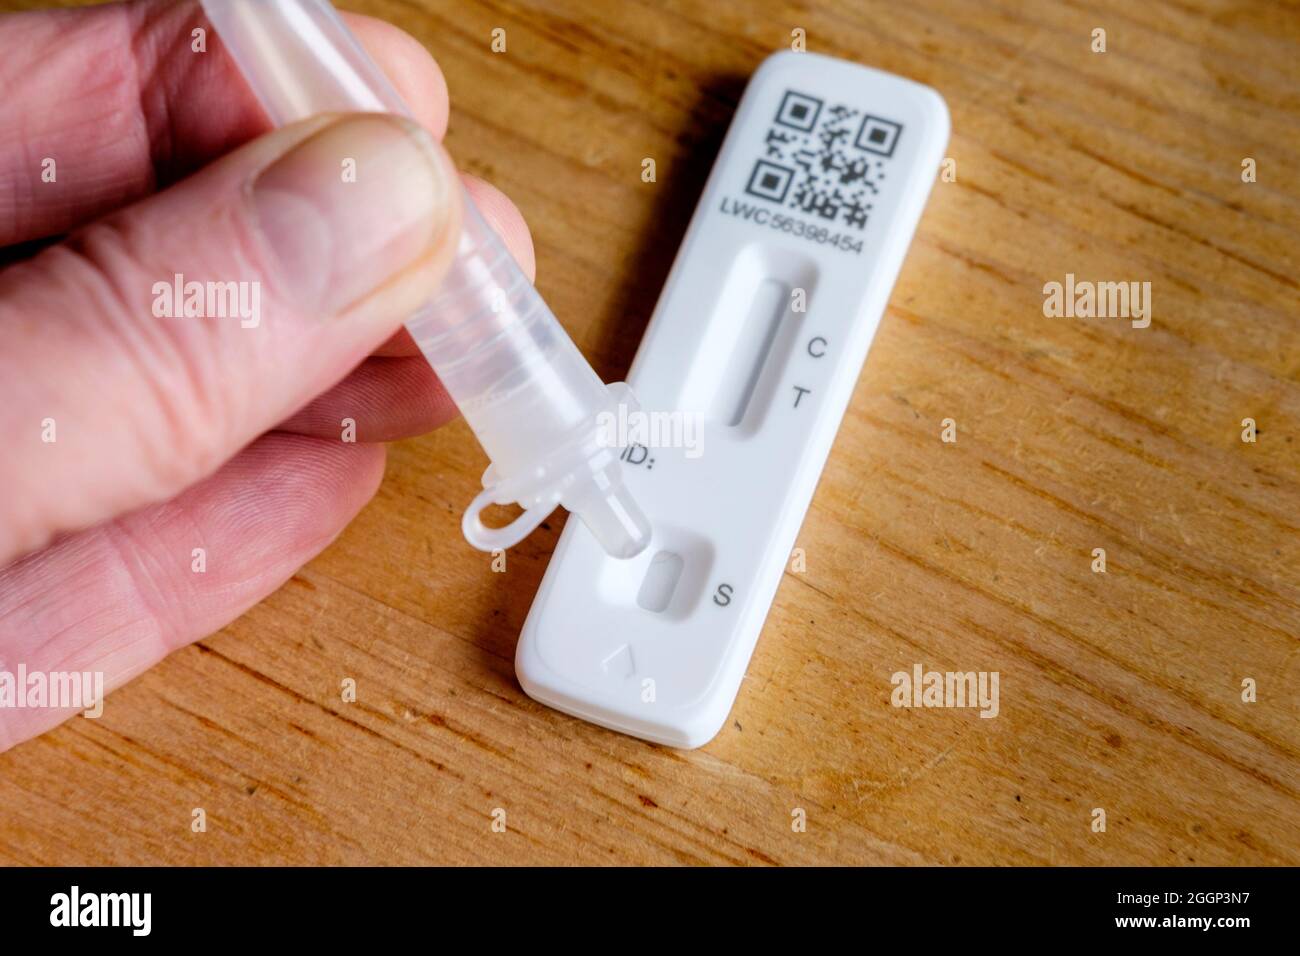 NHS Covid-19 Lateral Flow Self-Test, sample being added to test cassette. Stock Photo